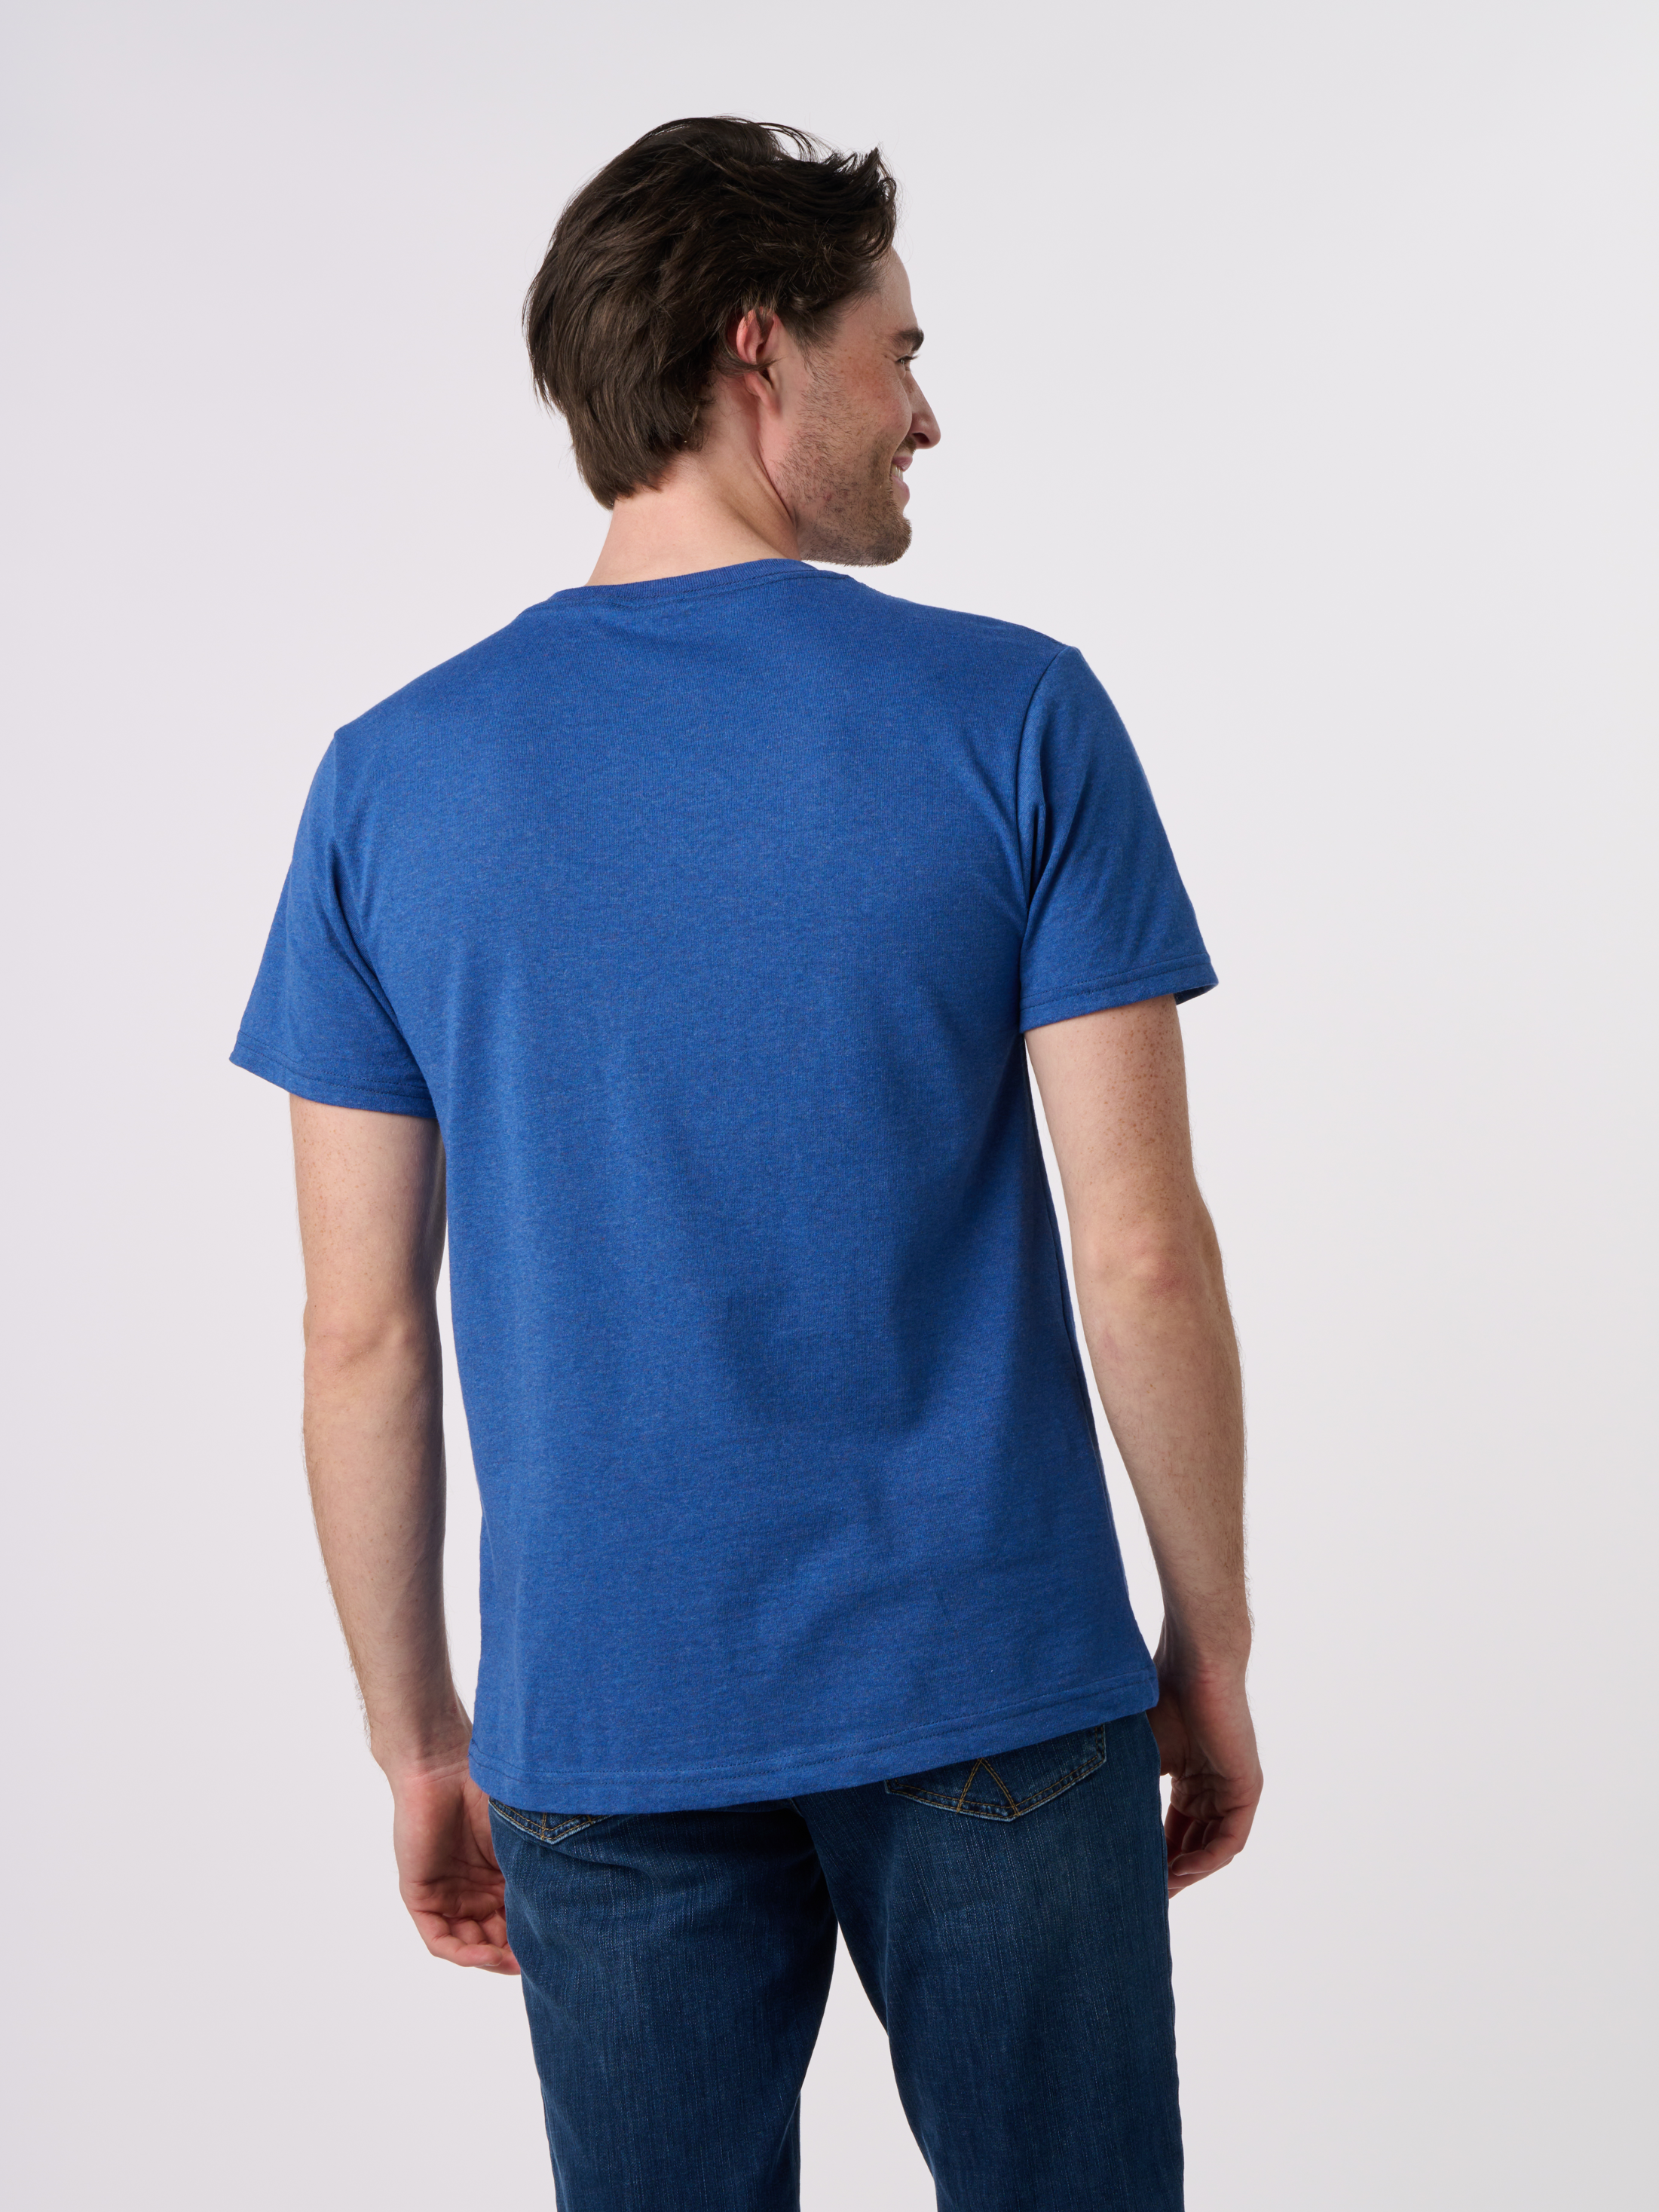 RECOVER_RS100_CLASSICSHORTSLEEVETSHIRT_SWEETBLUE_BACK.png